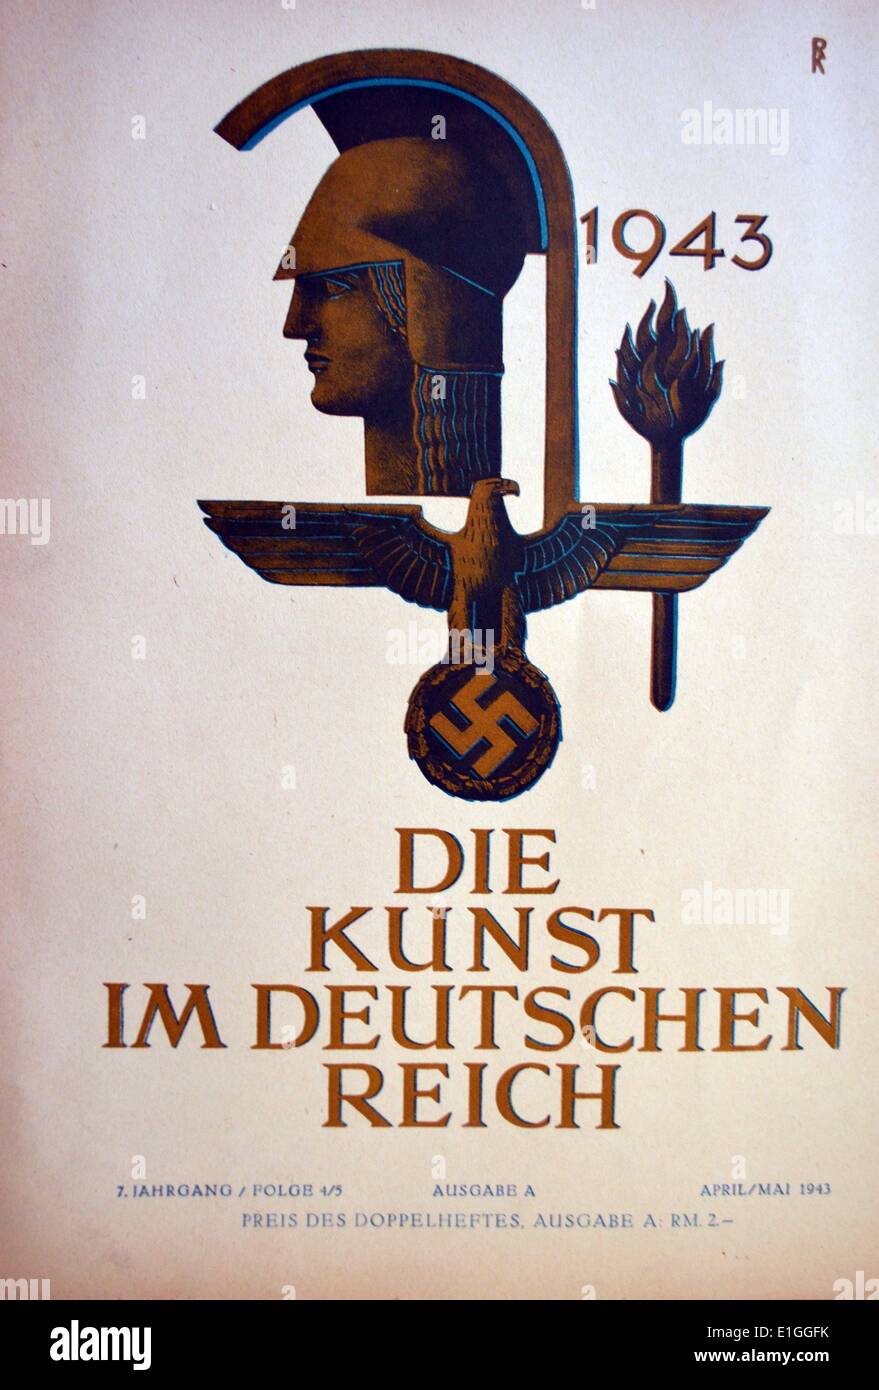 1943 cover of 'Die Kunst im deutschen Reich' (Art in the German Reich) was first published in January 1937 by Gauleiter Adolf Wagnerand later issued under the direction Adolf Hitler himself. Stock Photo